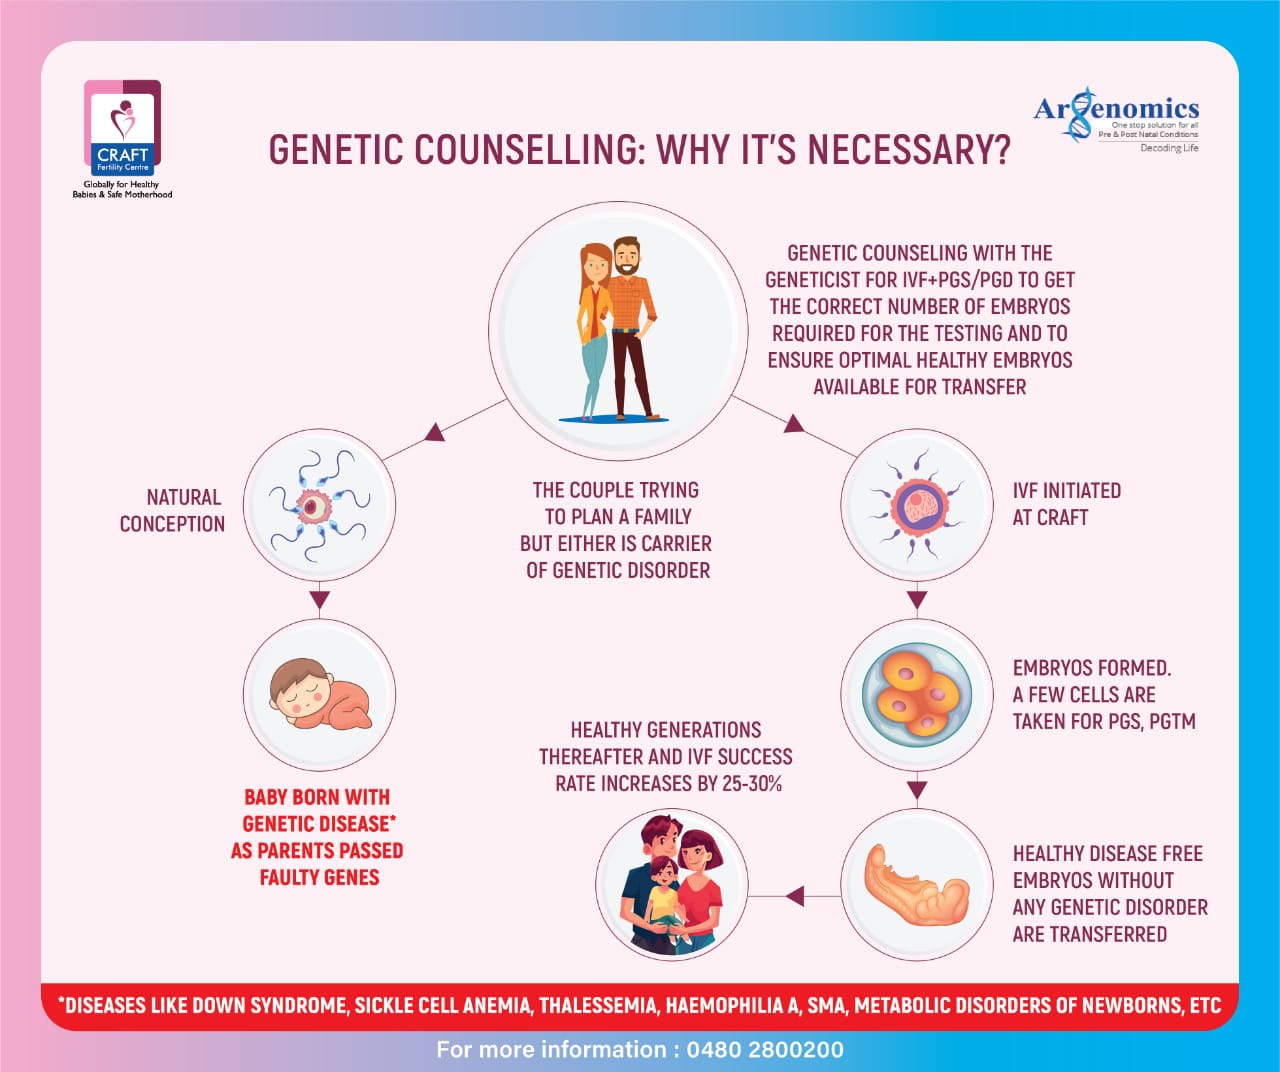 Genetic Counseling: Why it's necessary?